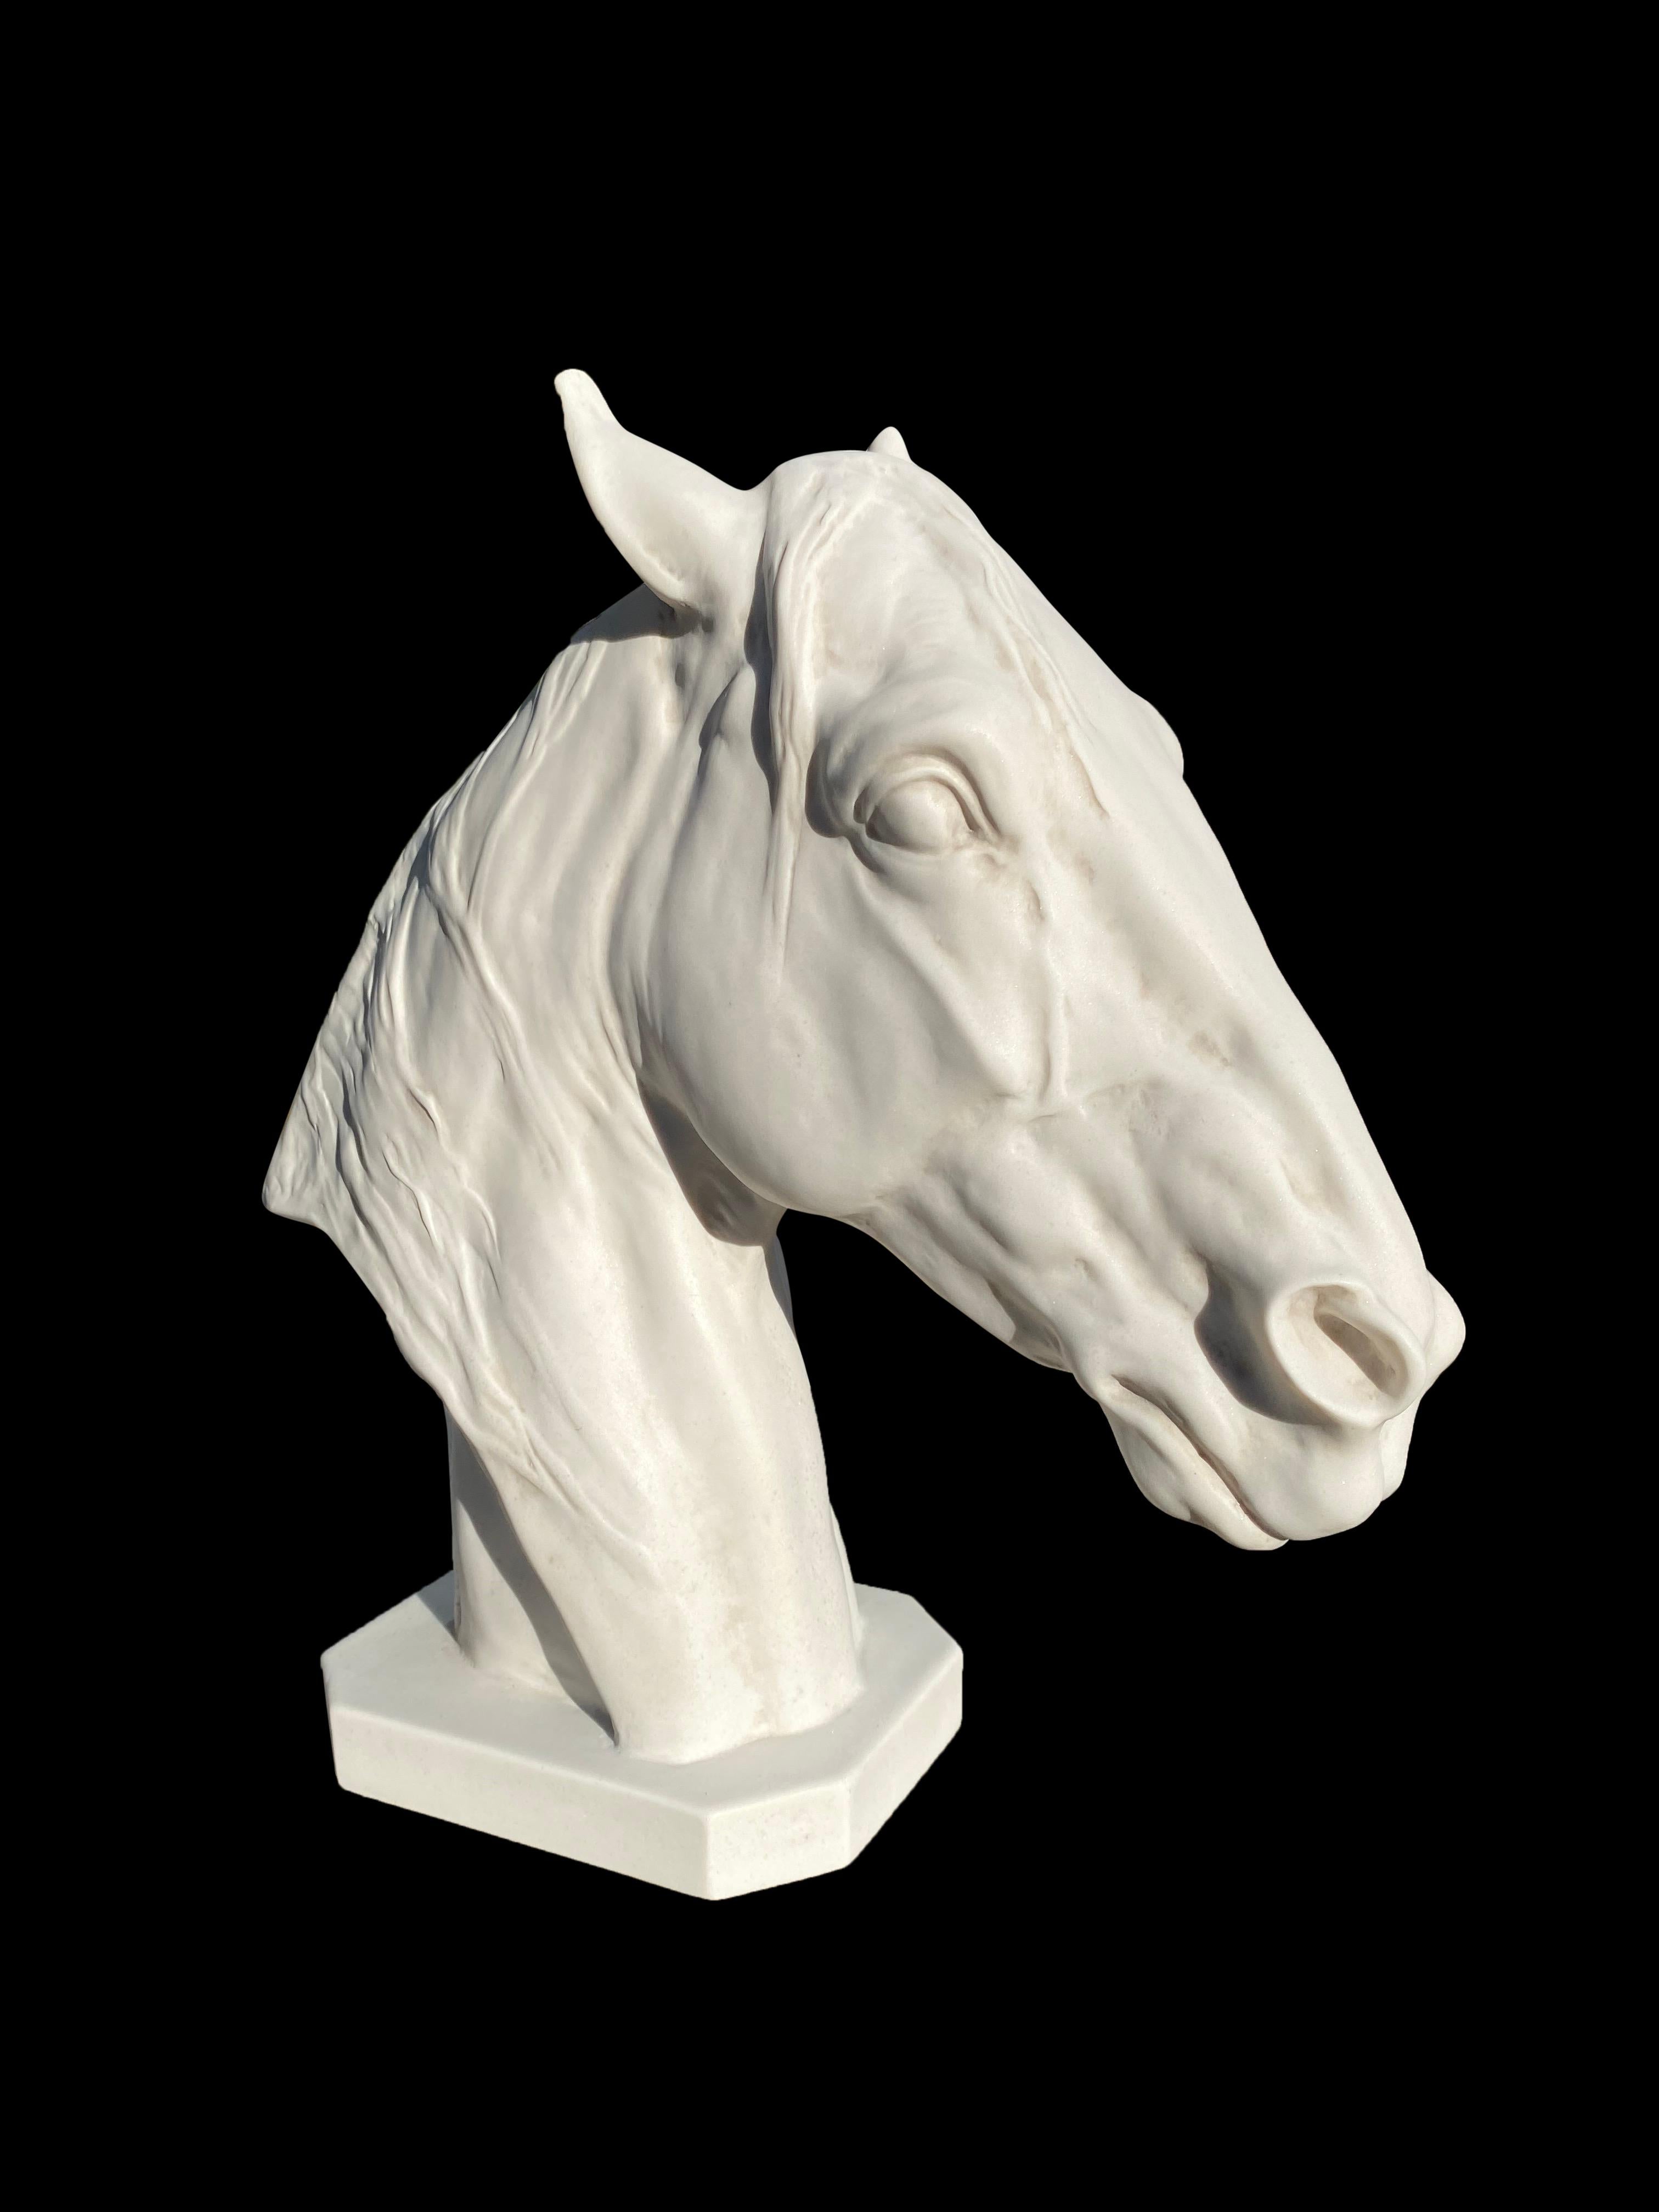 A gorgeous thoroughbred horse portrait sculpture, 20th century. This stunning bust is full of life and motion. Sculptured after Albert Hinrich Hussman, 1874-1946.

Marble sculpture

Our sculpture is produced by a unique and proprietary dry